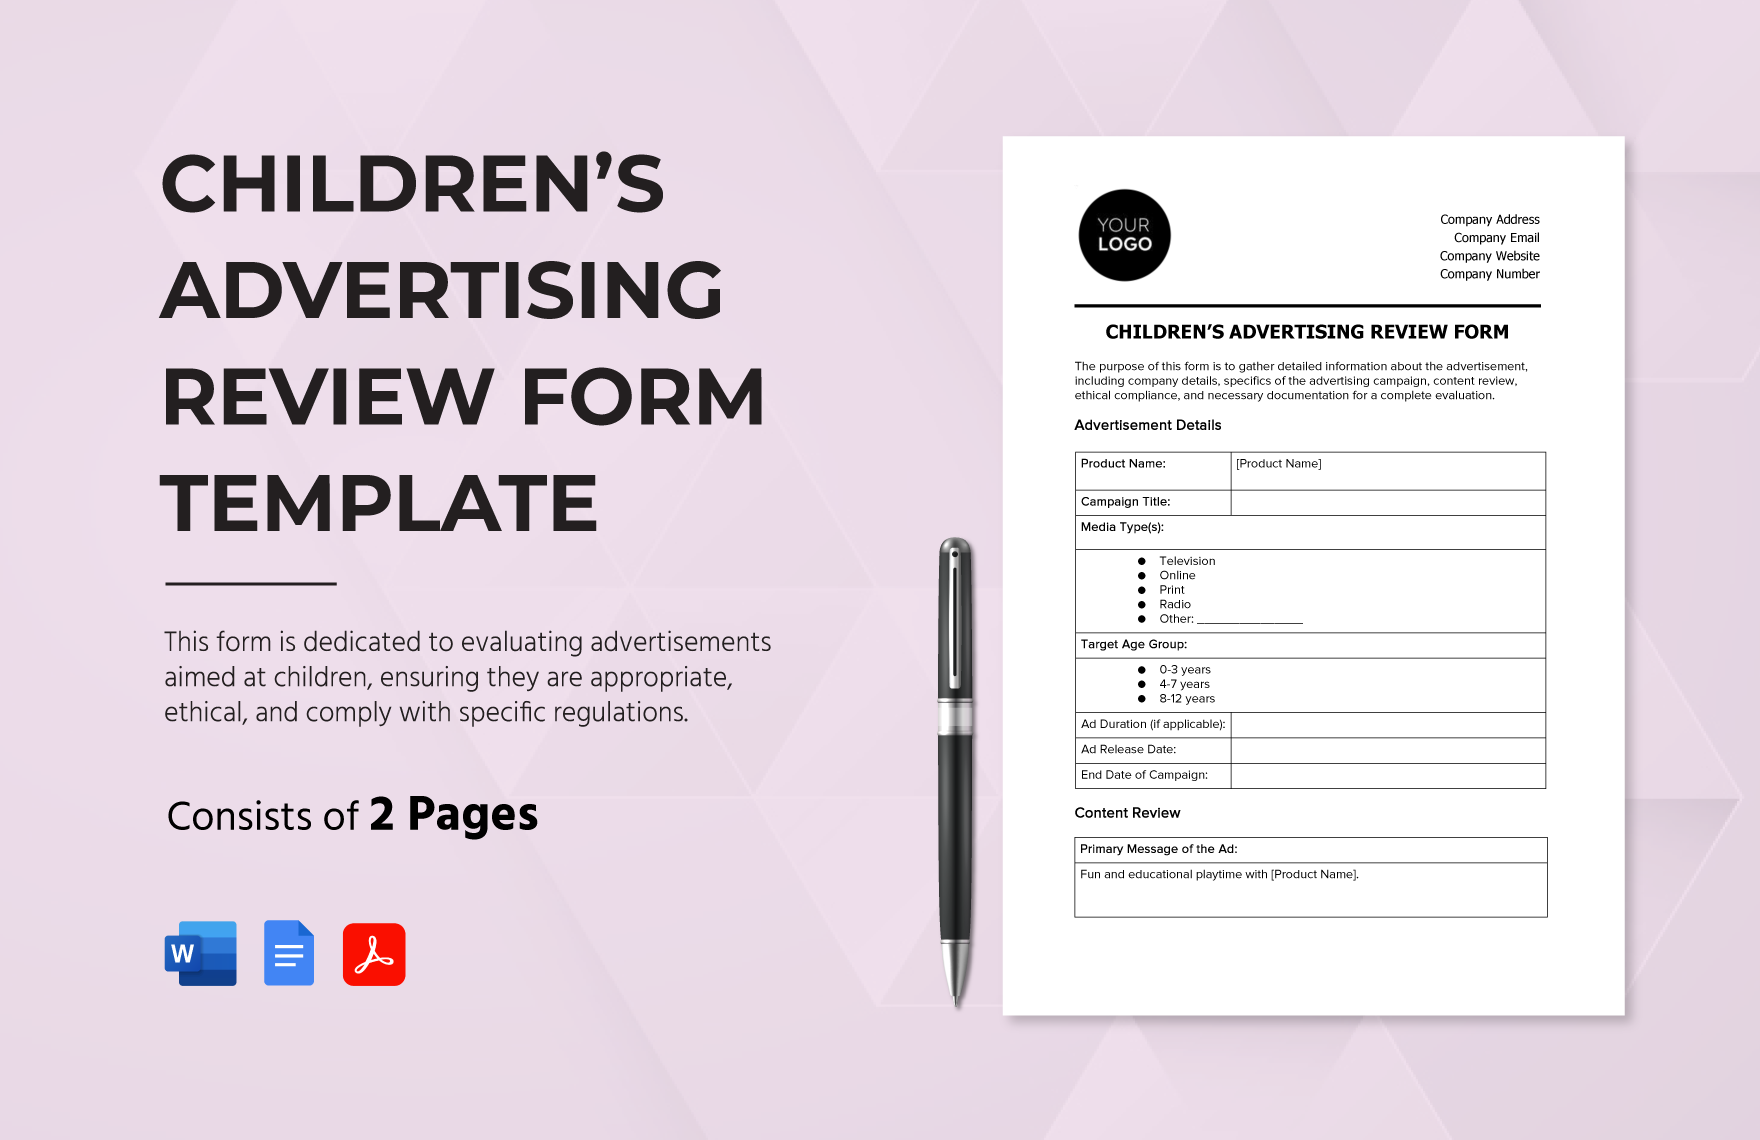 Children’s Advertising Review Form Template